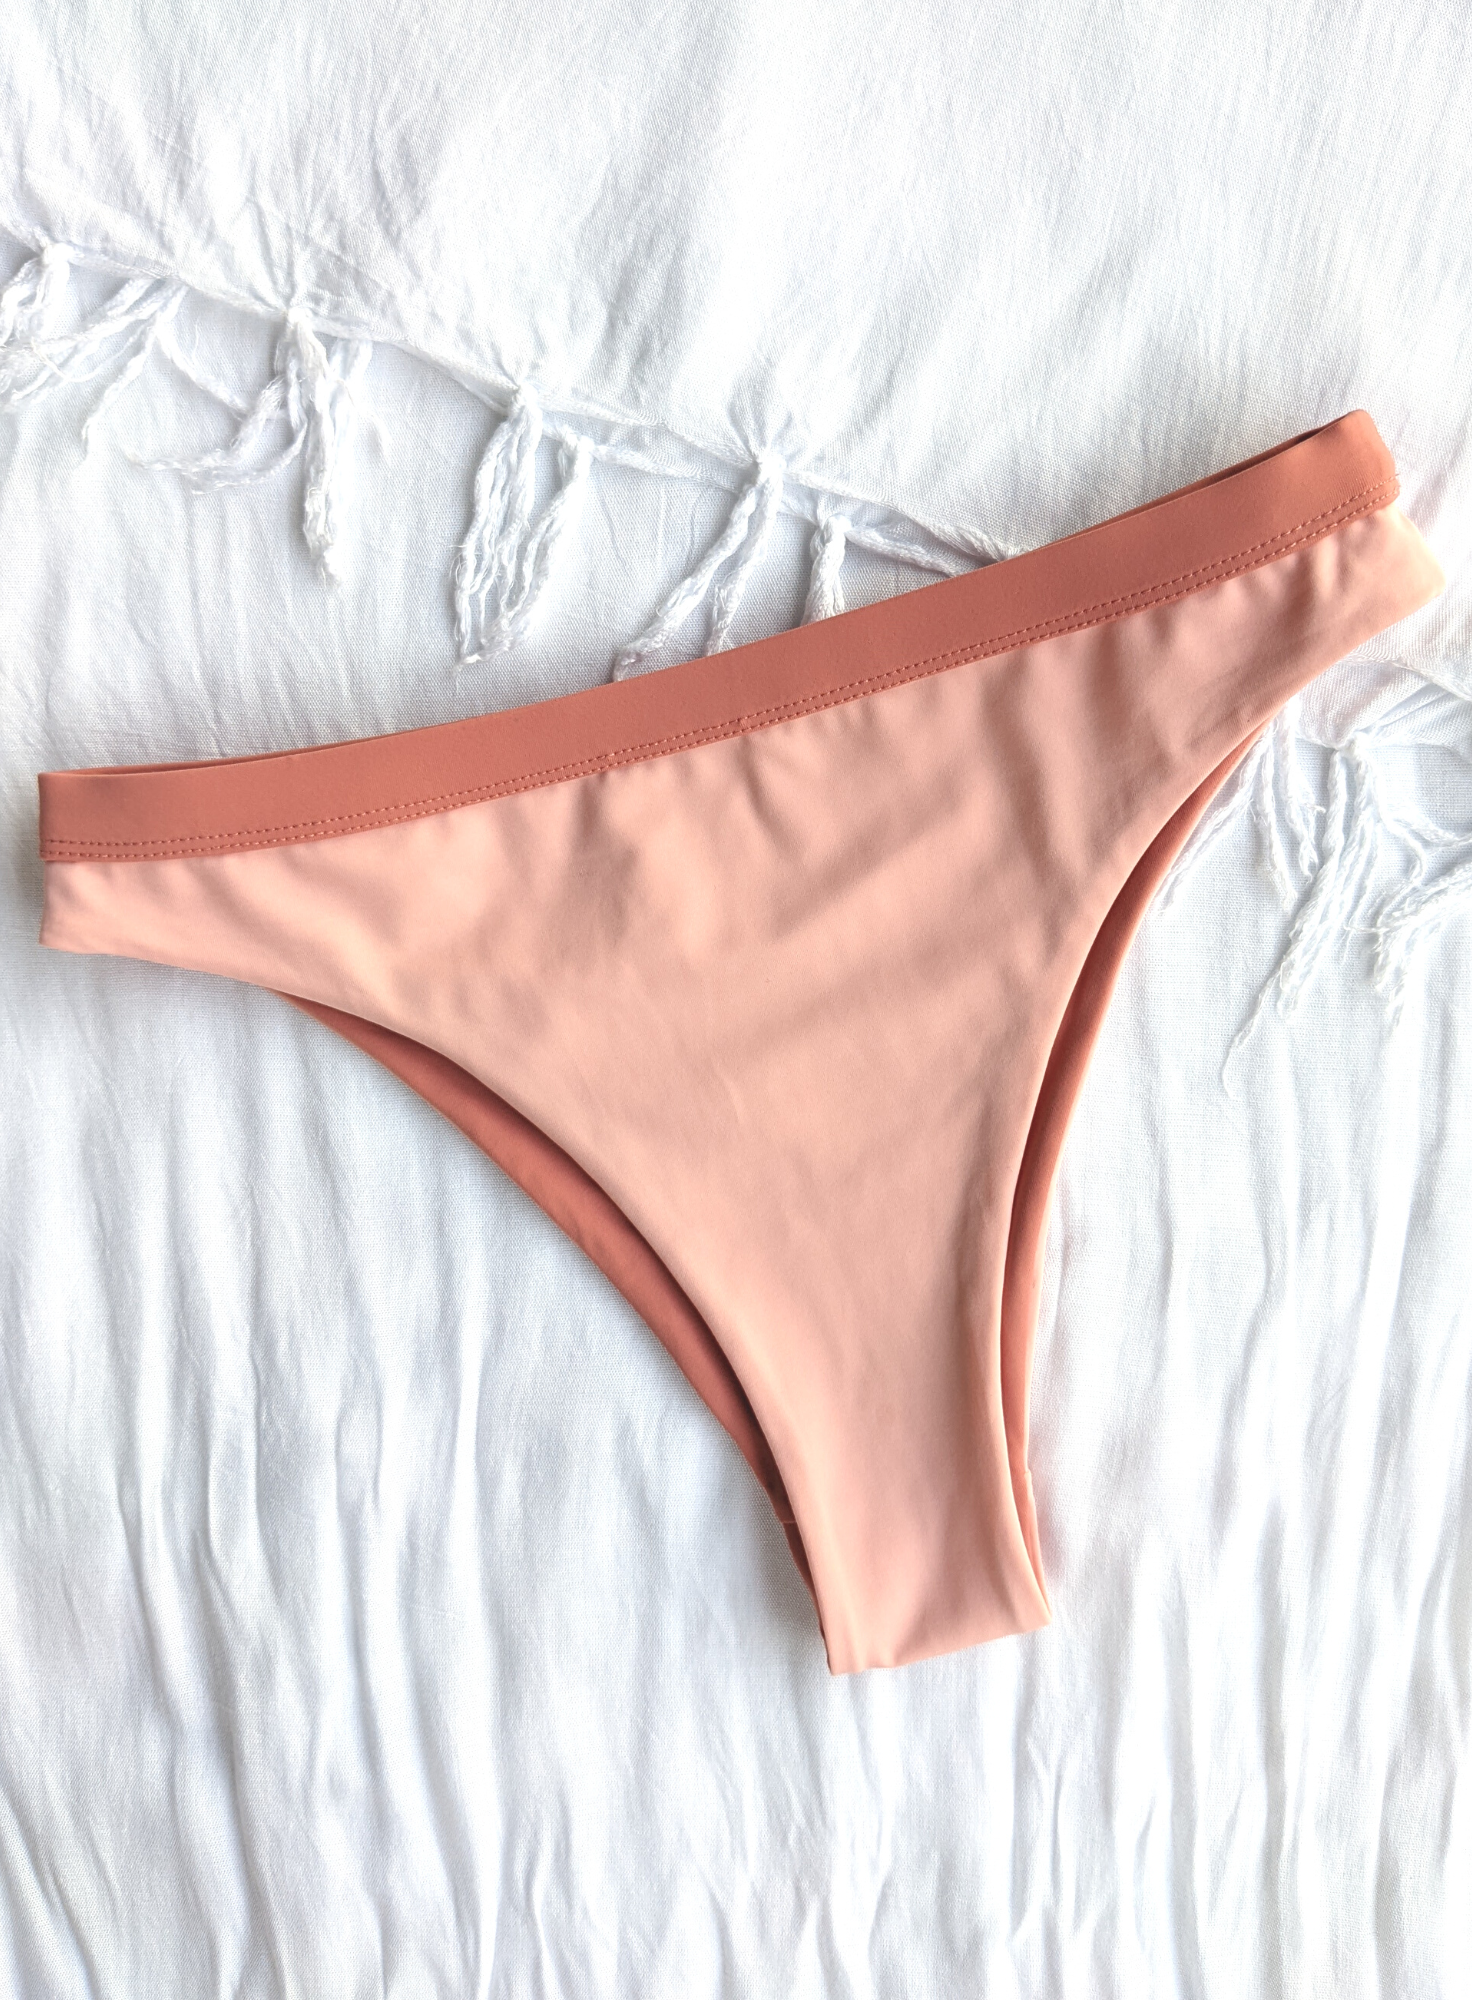 Reversible Blush and Peach Medium High Cut Bikini Bottom Made From Eco Friendly Recycled Regenerated Fabric Peach Front Flat Lay View